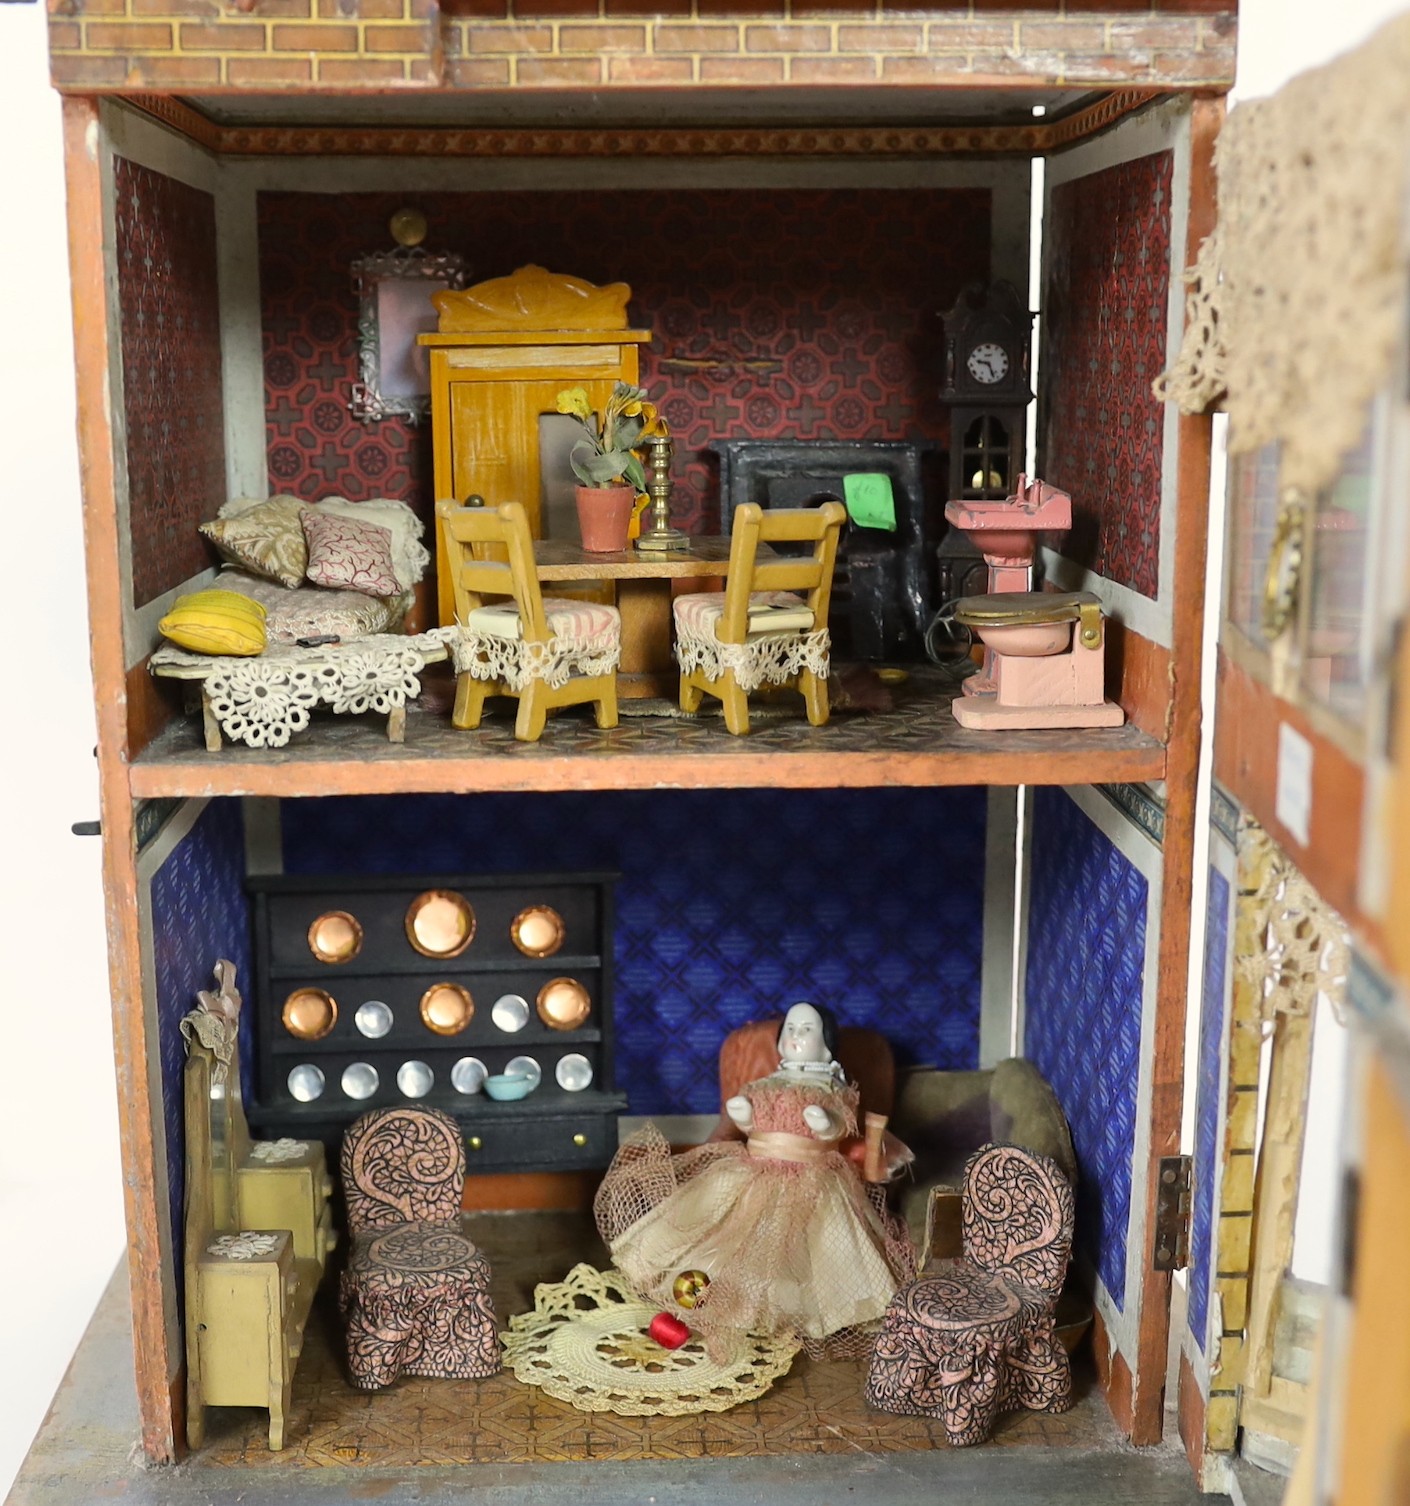 A Moritz Gottschalk 'Blue Roof’ furnished dolls’ house, circa 1880-85, single fronted with a bay - Image 4 of 6